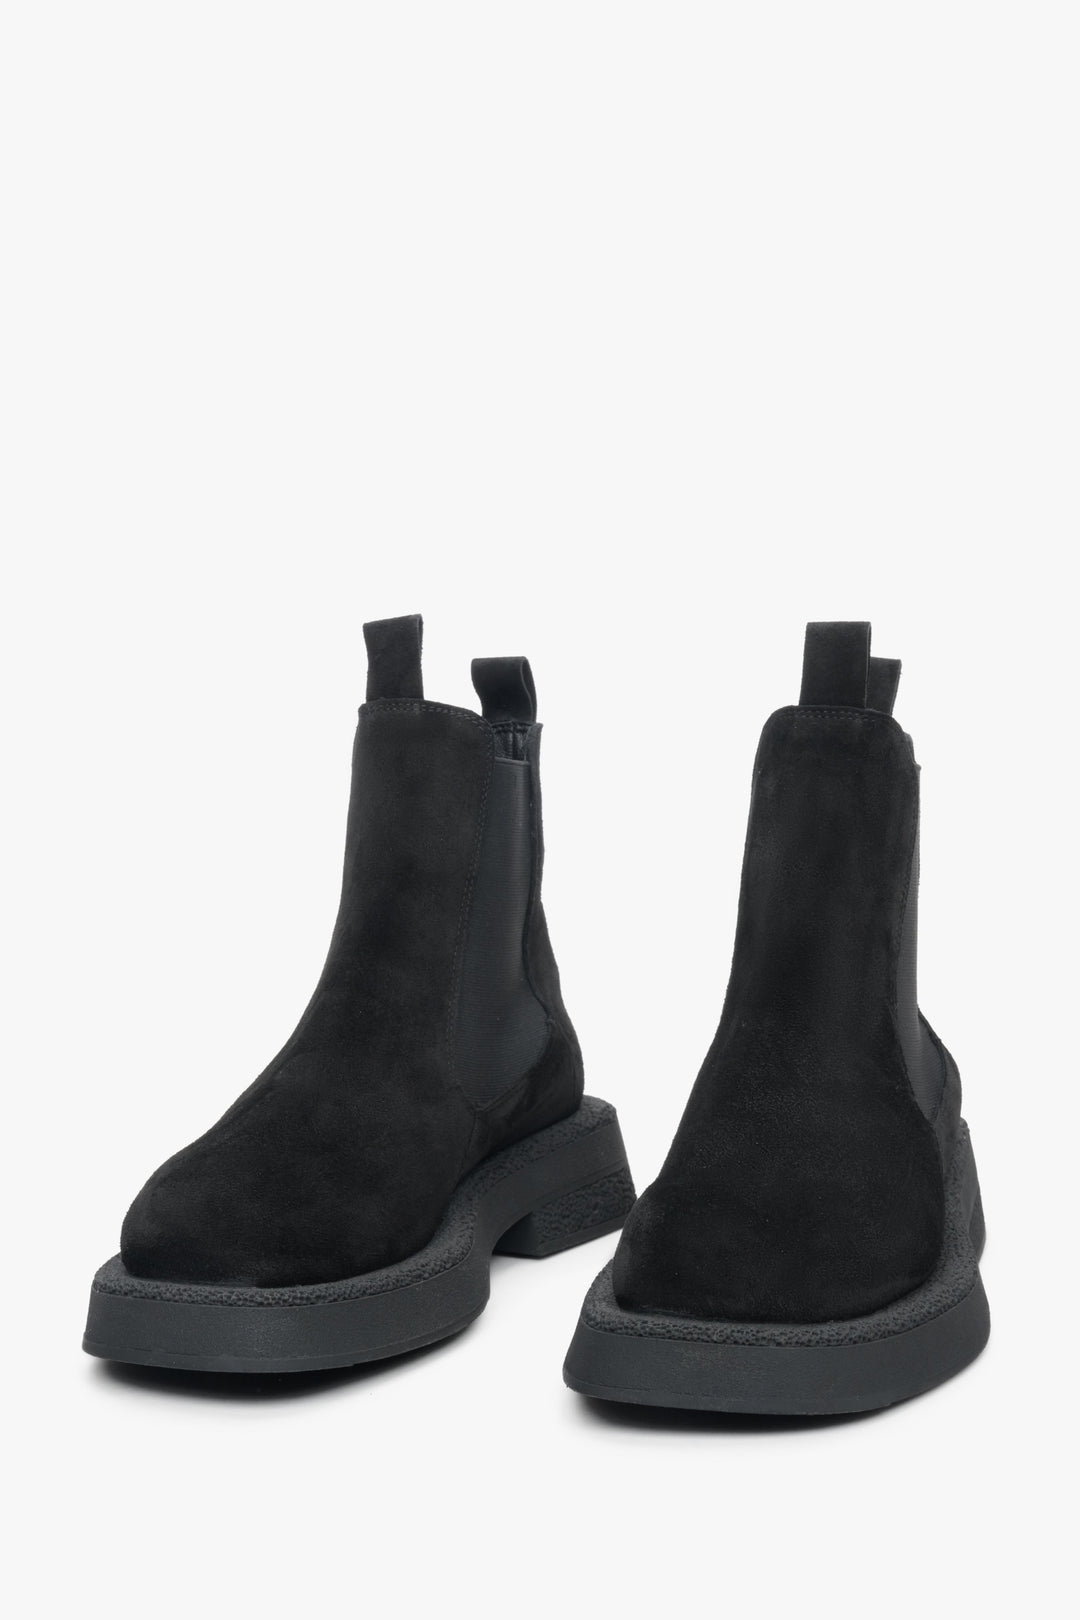 Women's black Chelsea boots made of genuine suede - a close-up on tip of the shoe.